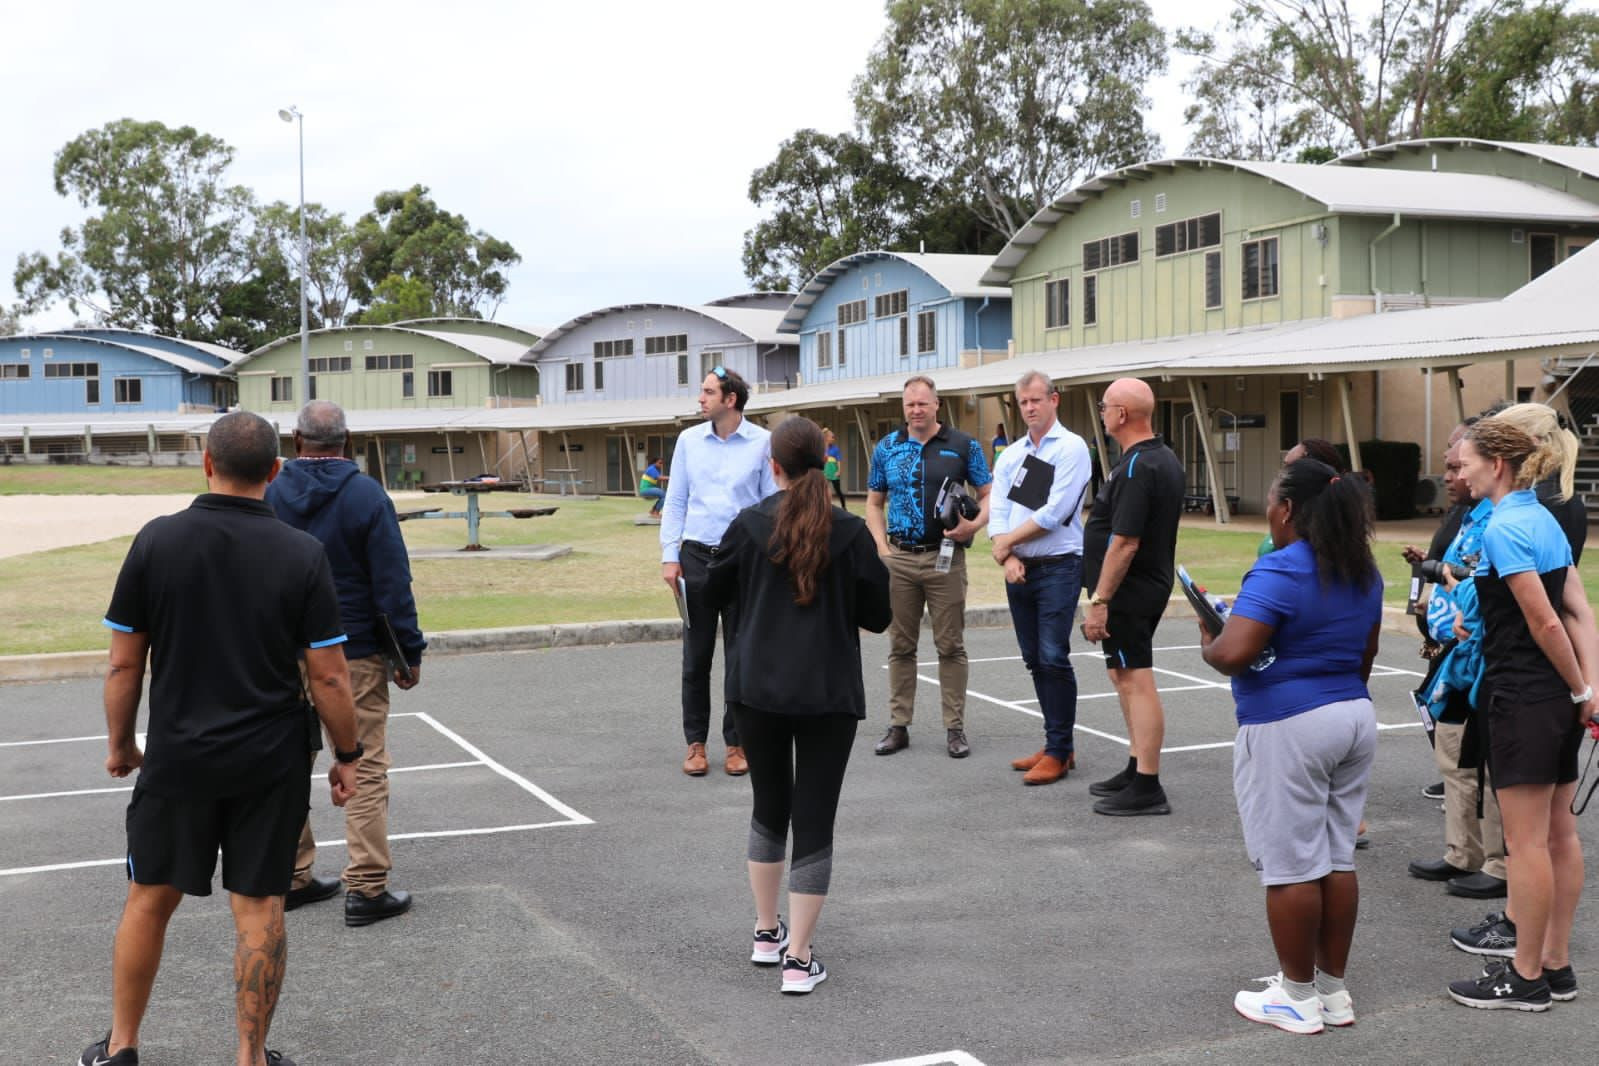 Executive director of Solomon Islands National Institute of Sports, Aaron Alsop, took Australia's High Commissioner to Solomon Islands, Rod Hilton, on a tour of the Gold Coast Performance Centre ©Rod Hilton/Twitter